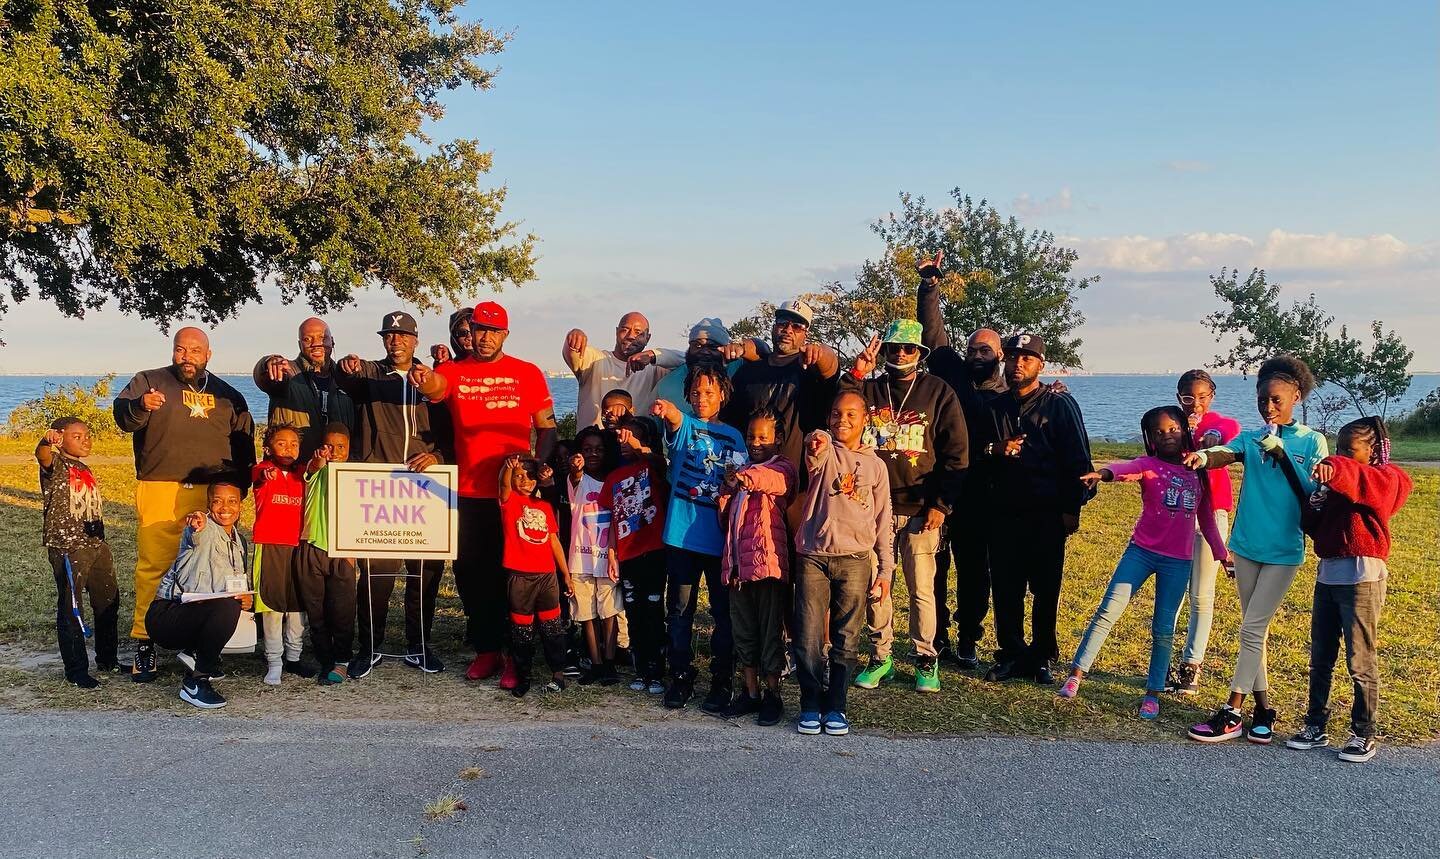 STUART GARDENS WAS A SUCCESS!!!

This Thursday 10/13/22 Meet Us On Wickham Ave., The Huntington Field Right Beside The C. Waldo Scott Center 5:00pm-8:00pm
#NewportNews #VA
#Everyone #Welcome

COMMUNITY POP-UP TOUR 🔥

#Action
#Doing #Our #Part

There